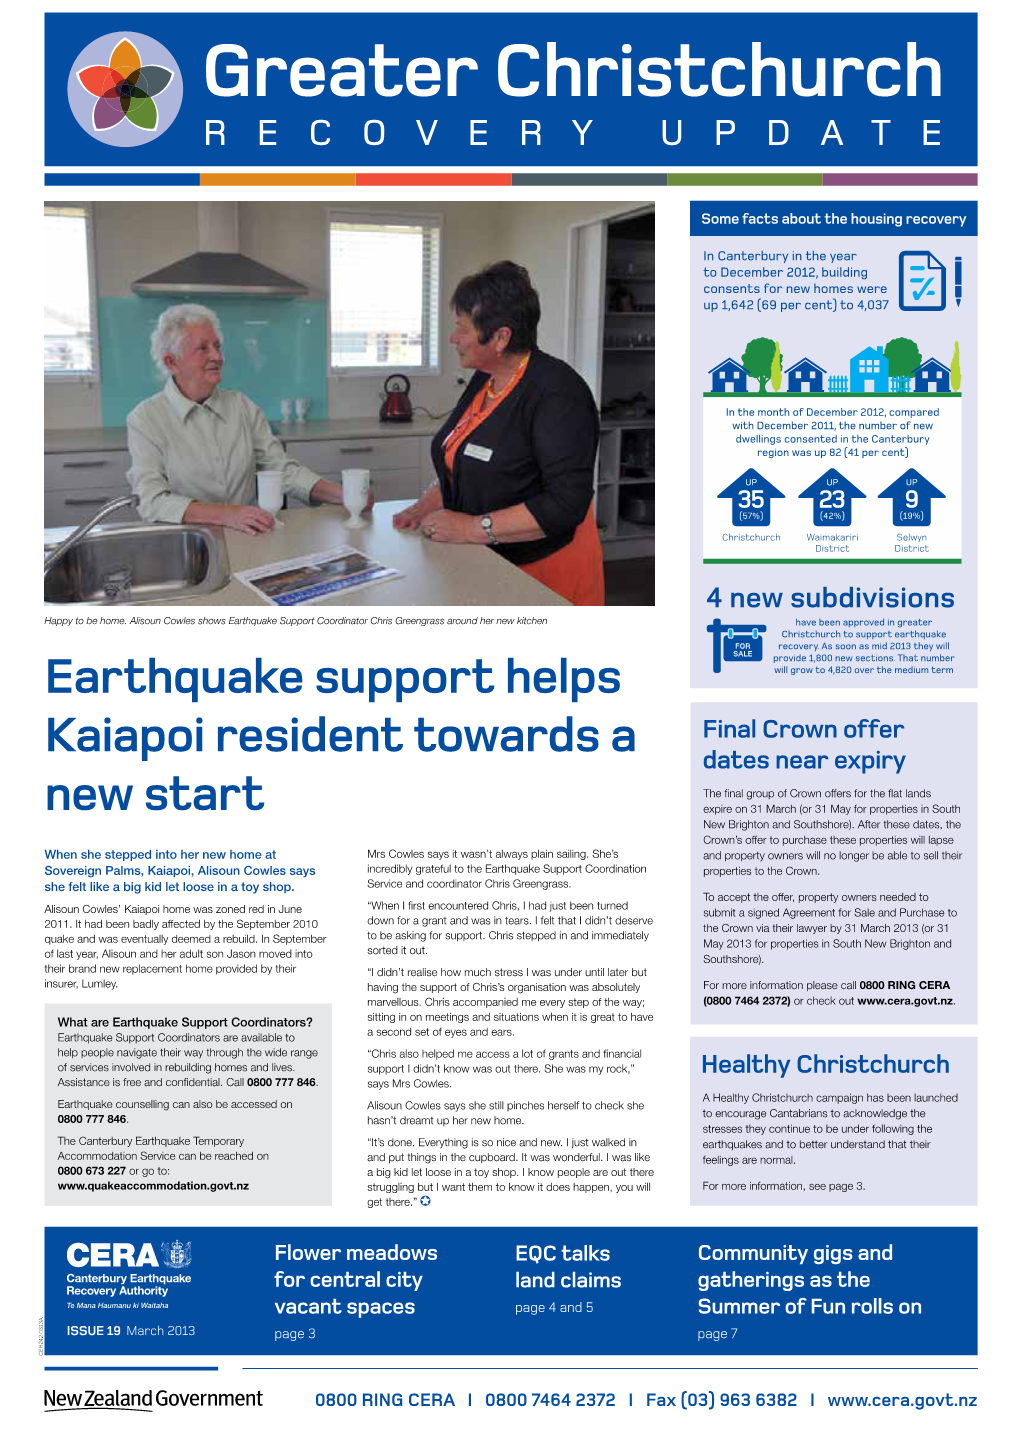 Greater Christchurch Recovery Update Issue 19 March 2013